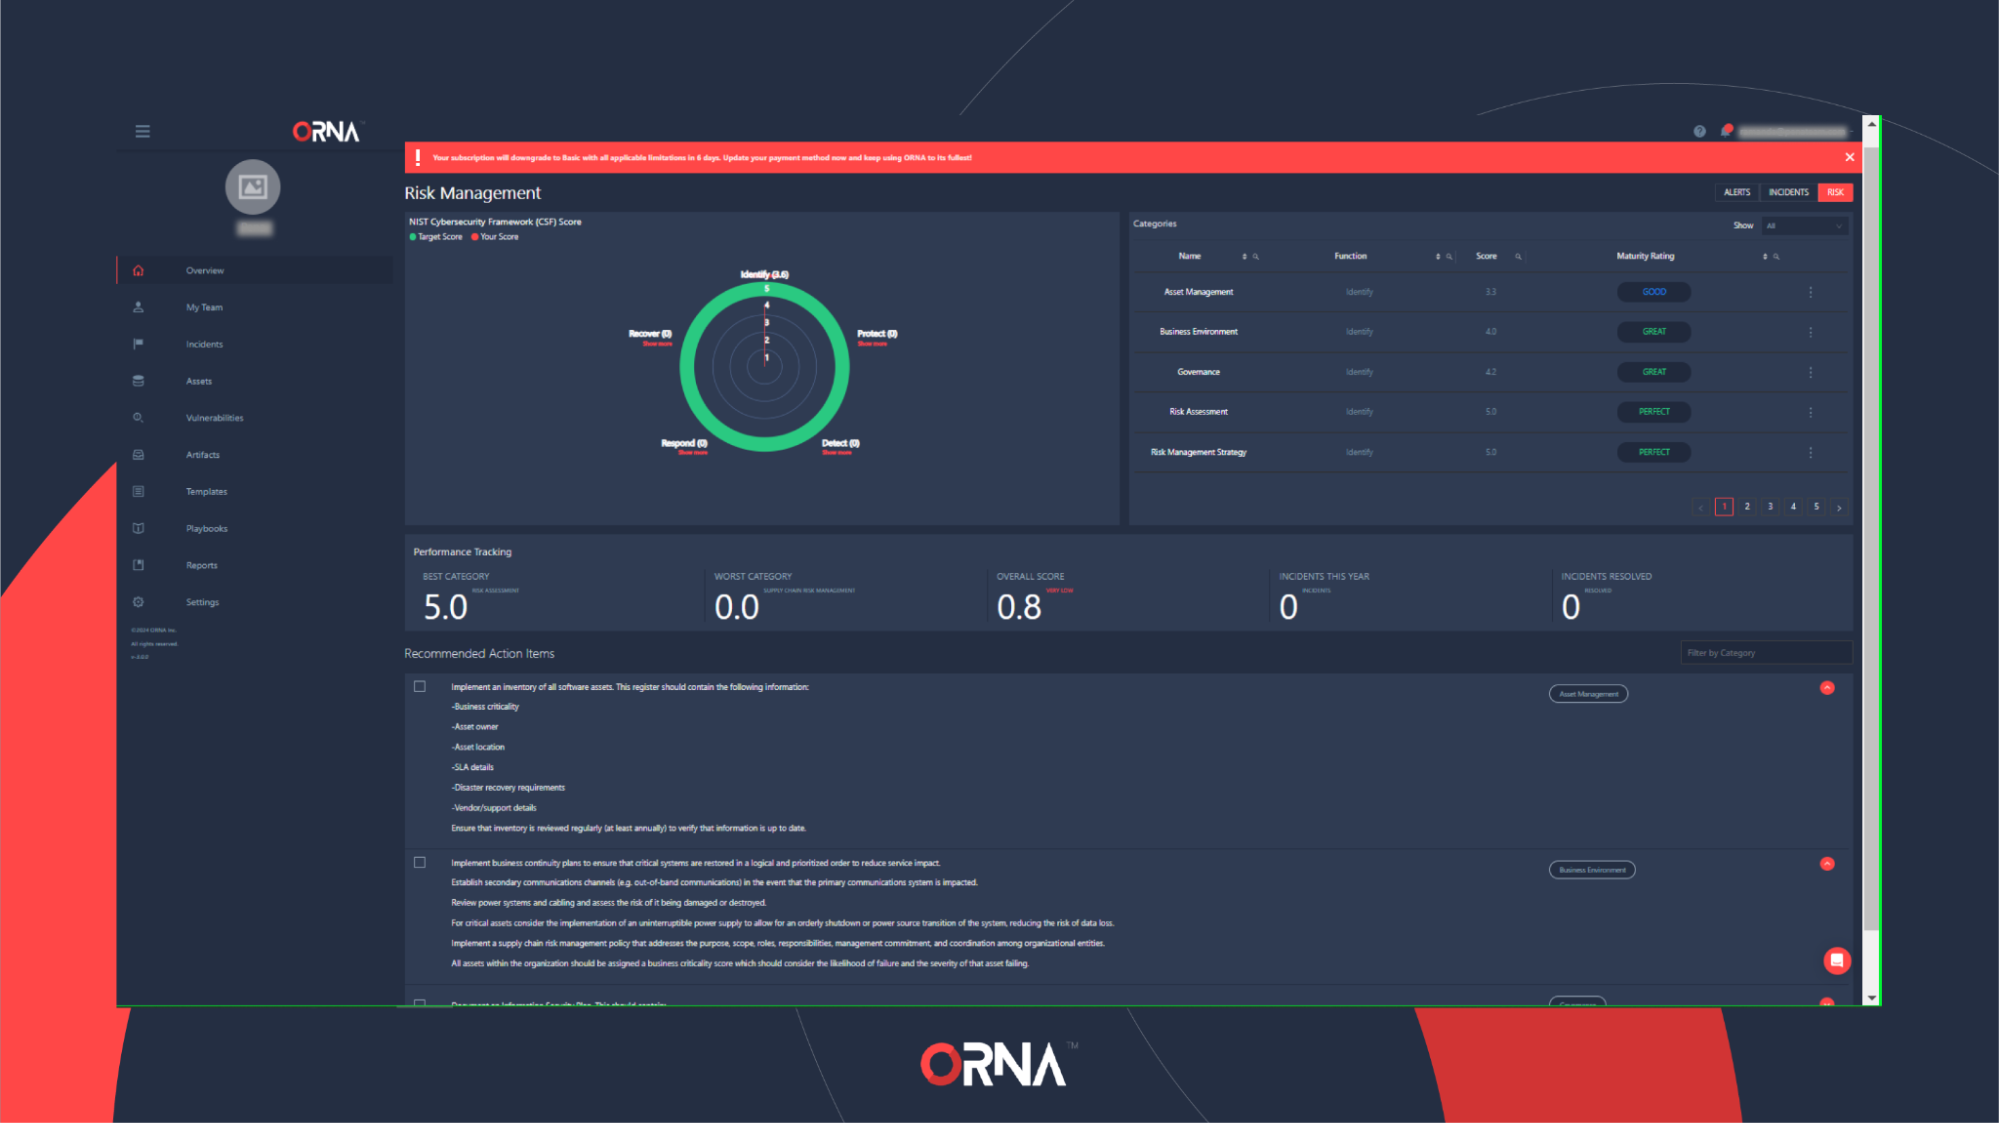 ORNA's Risk Management dashboard (partial)